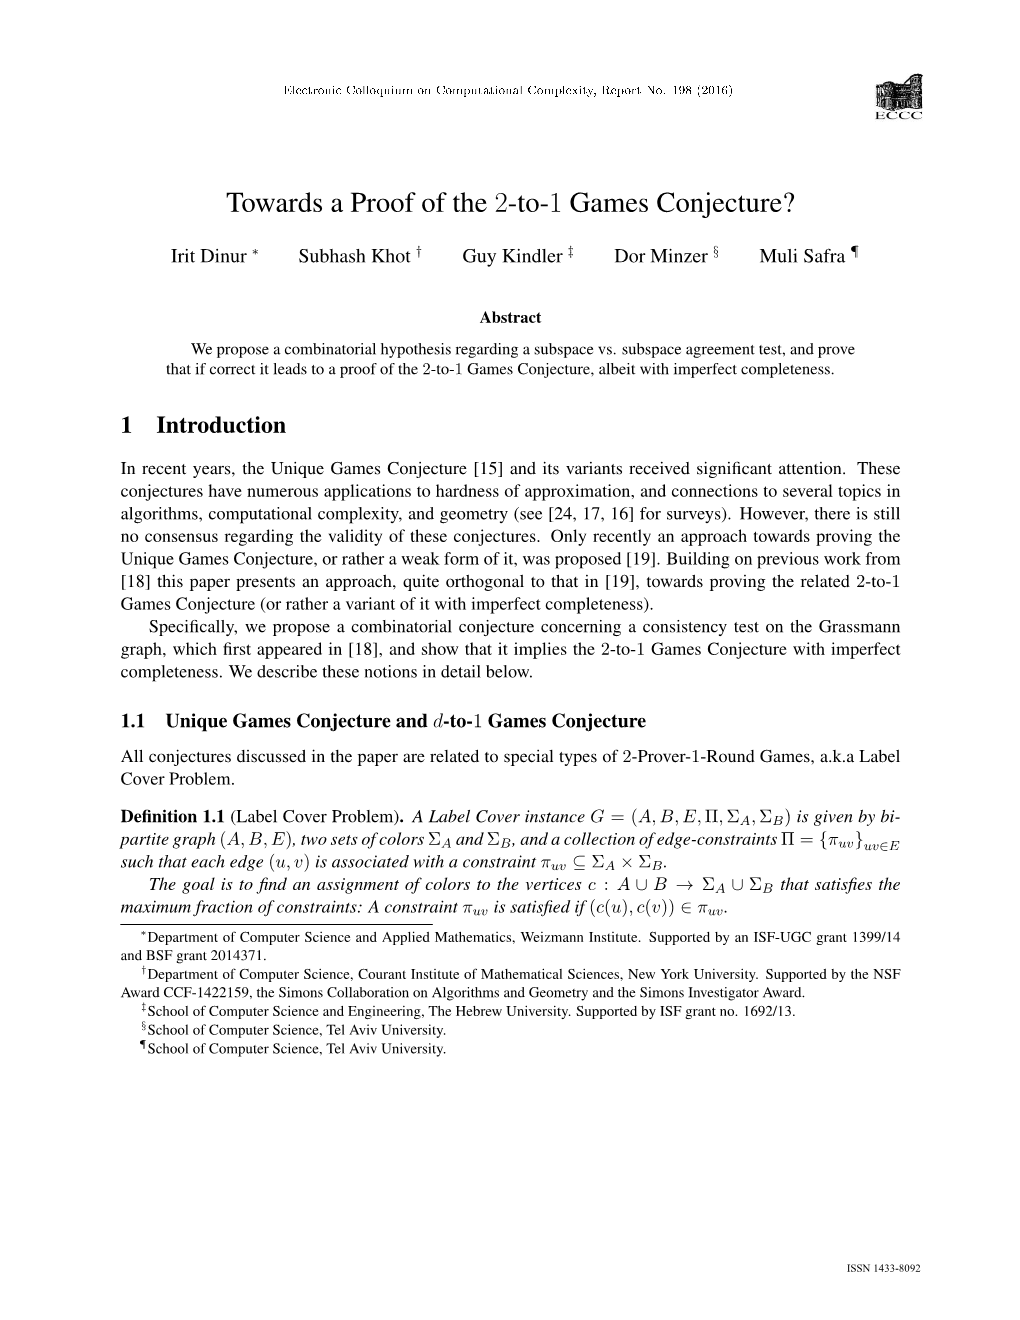 Towards a Proof of the 2-To-1 Games Conjecture?